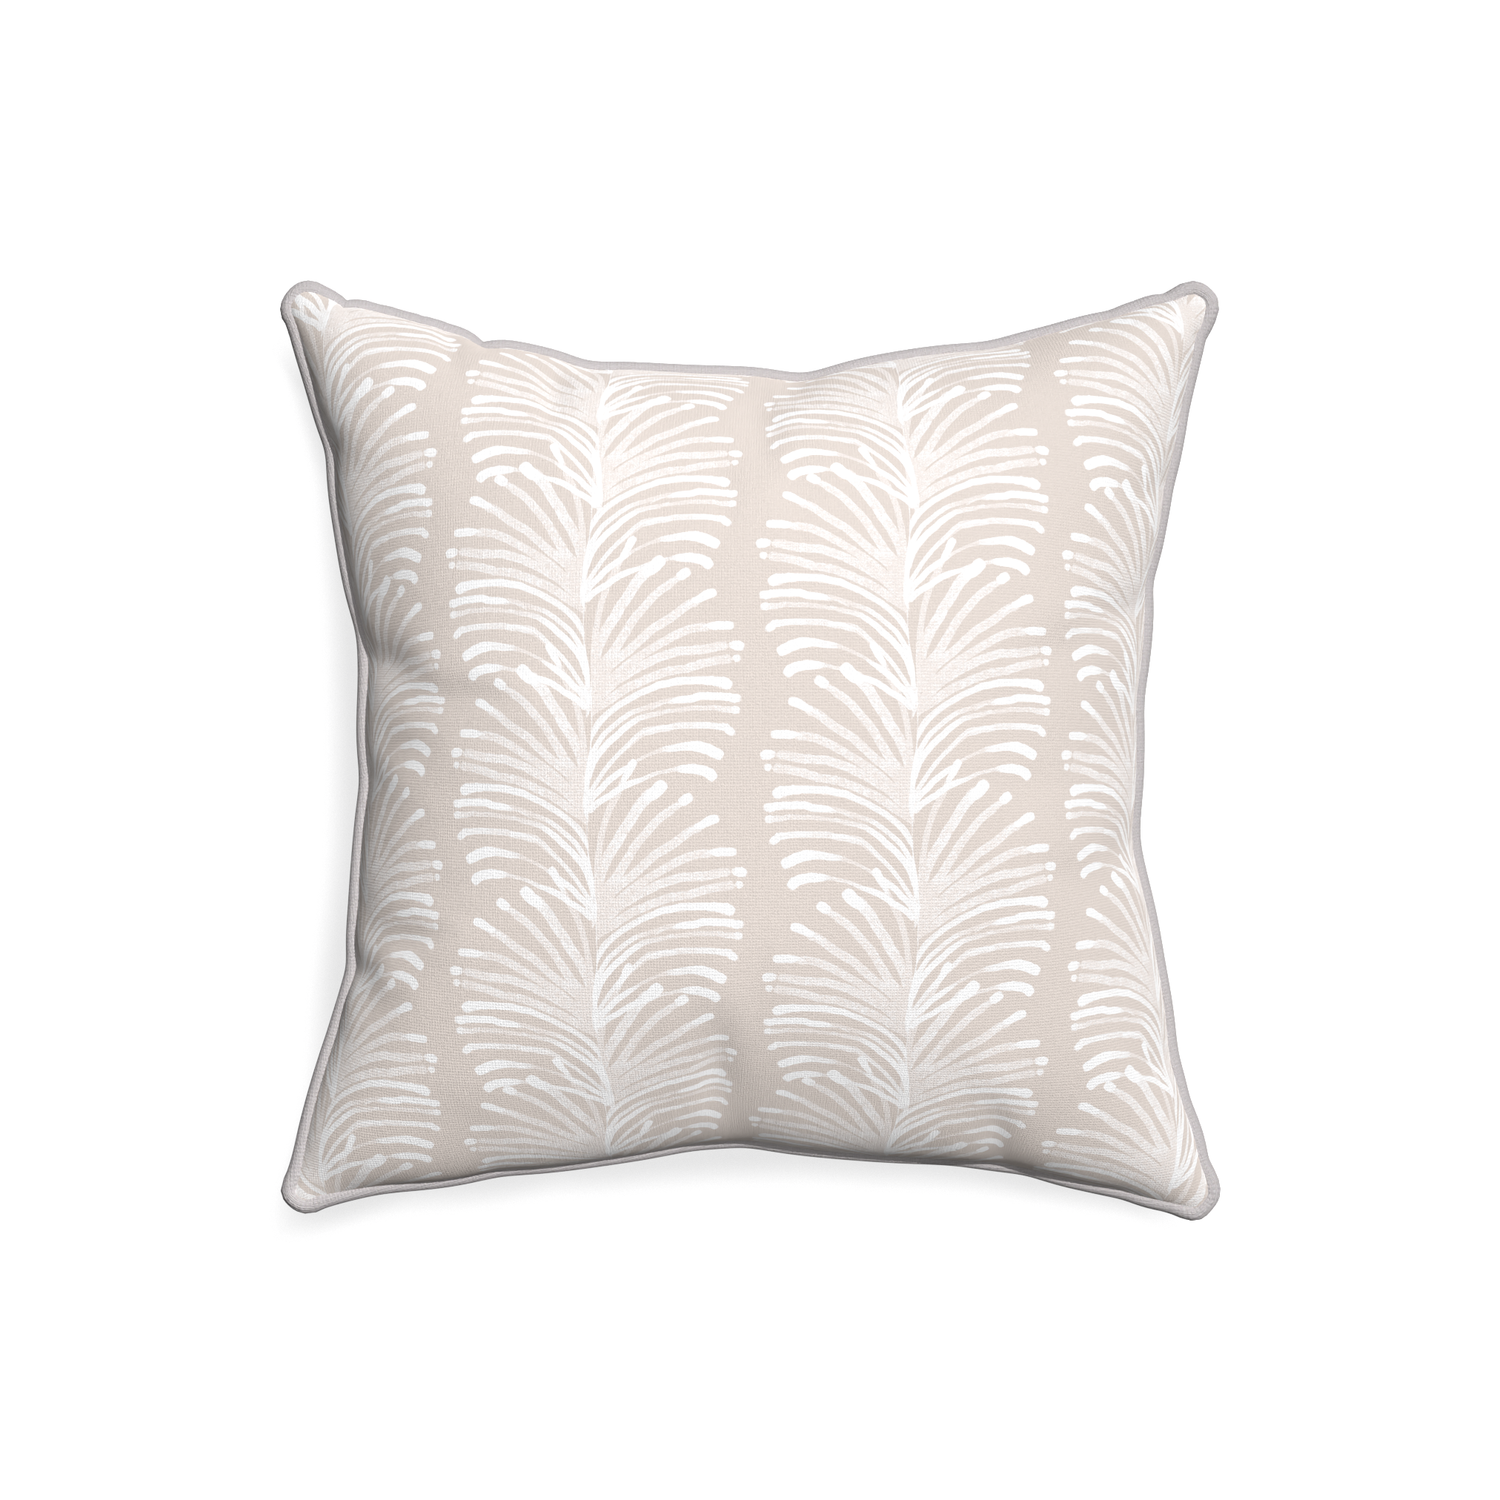 20-square emma sand custom sand colored botanical stripepillow with pebble piping on white background